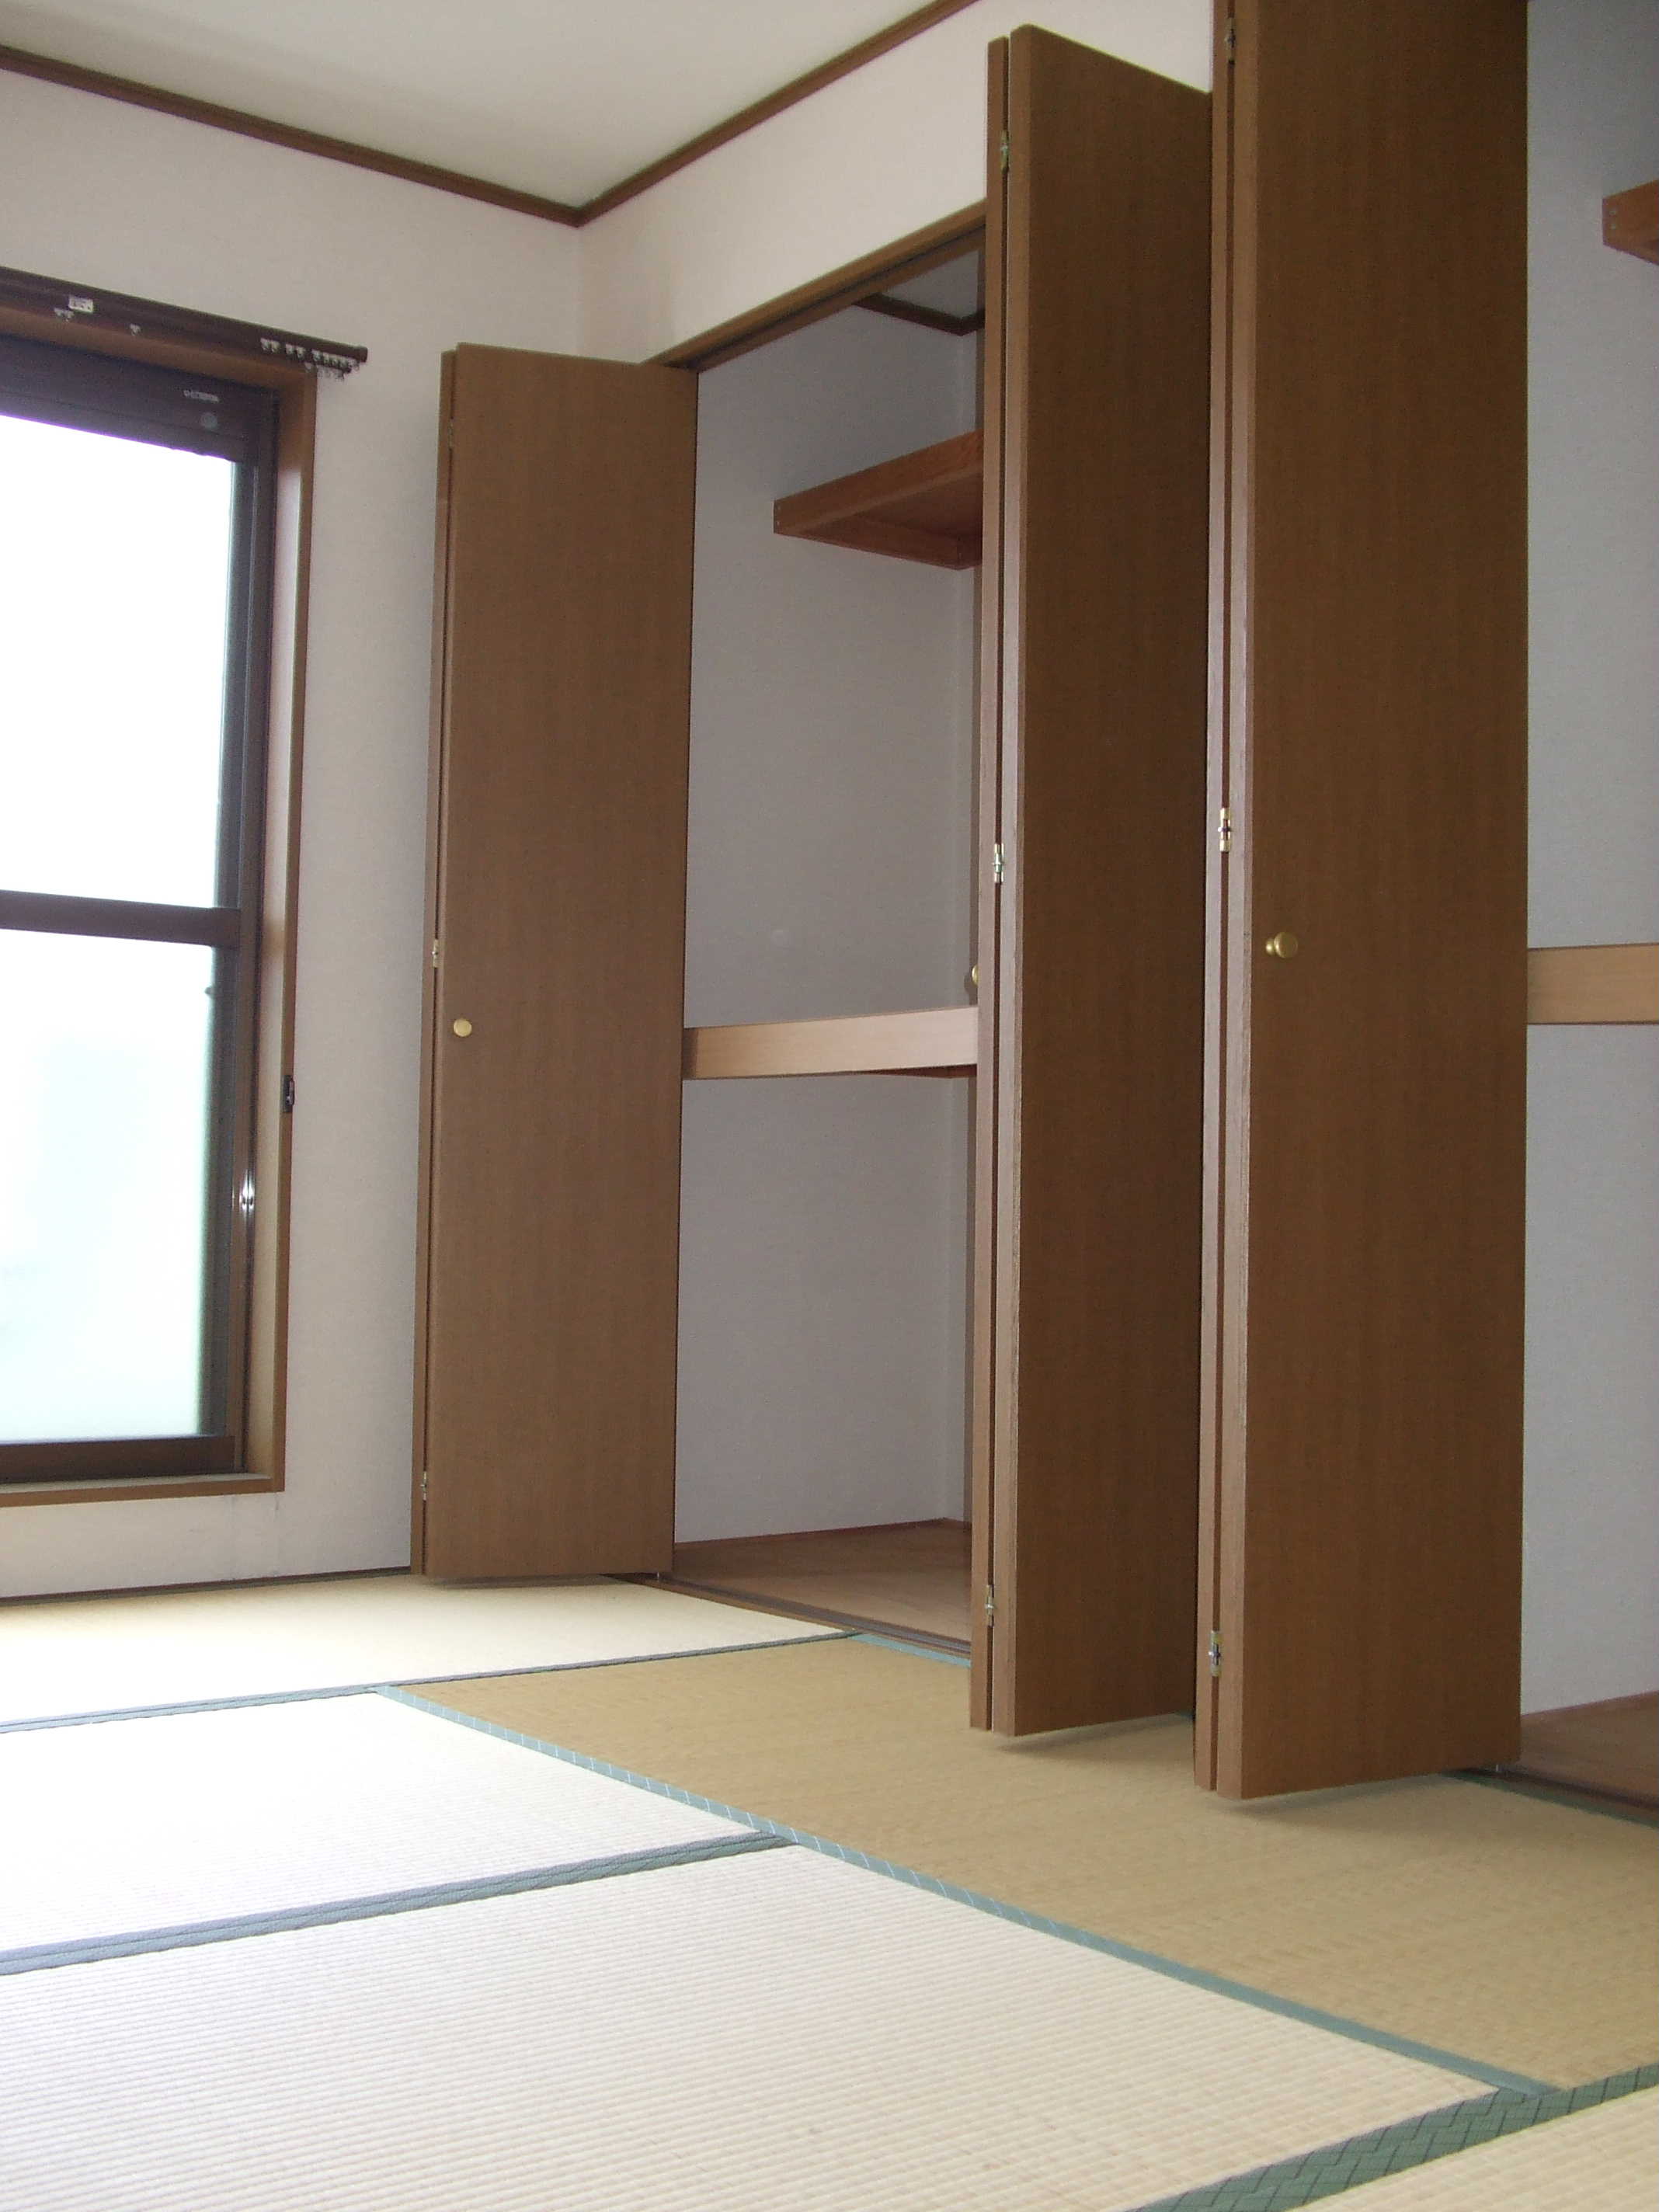 Living and room. State of the Japanese-style room.